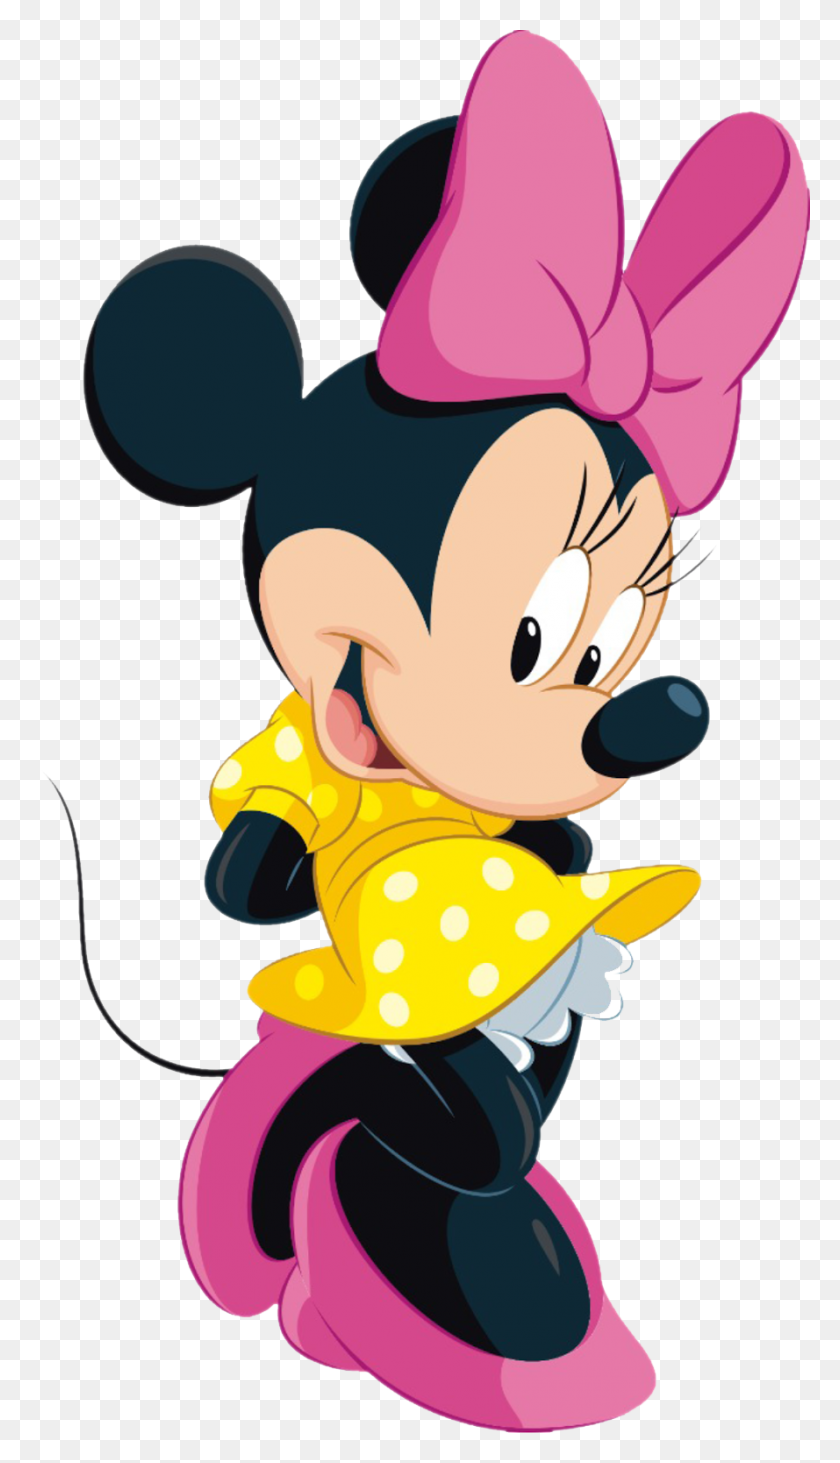 889x1600 Minnie Mouse Png Transparent - Minnie PNG